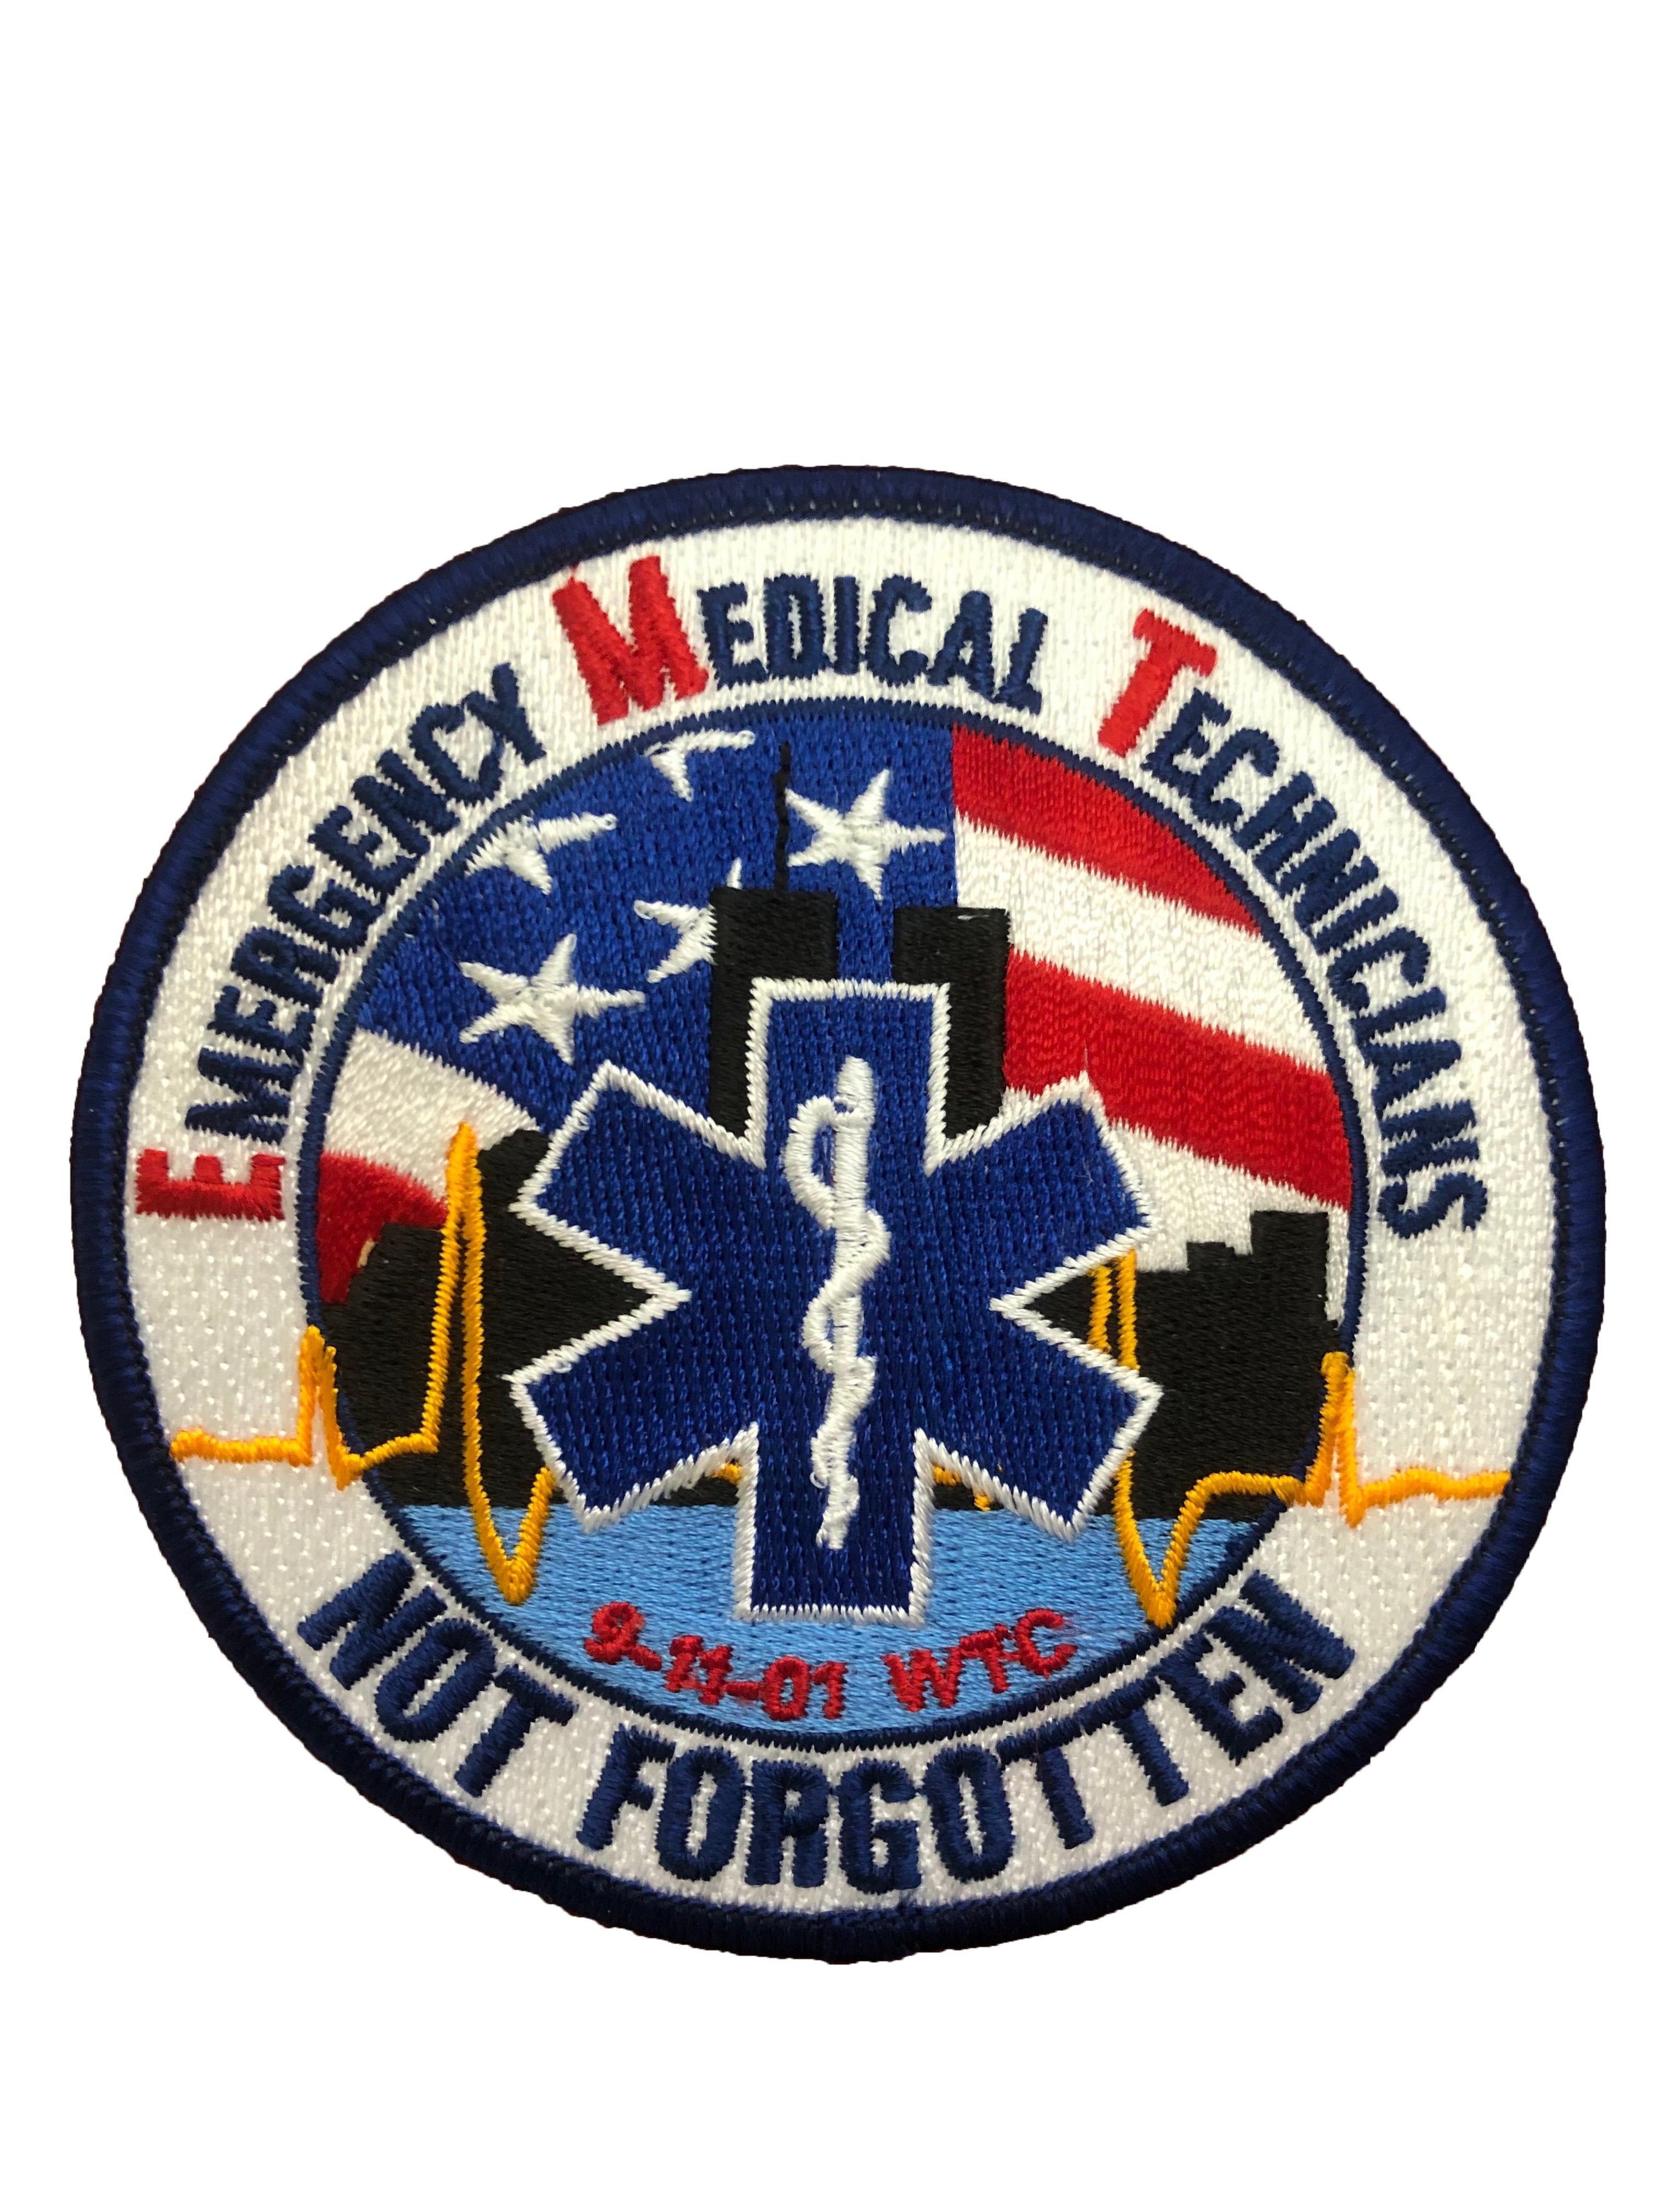 Emergency Medical Technician (EMT) Round Patch